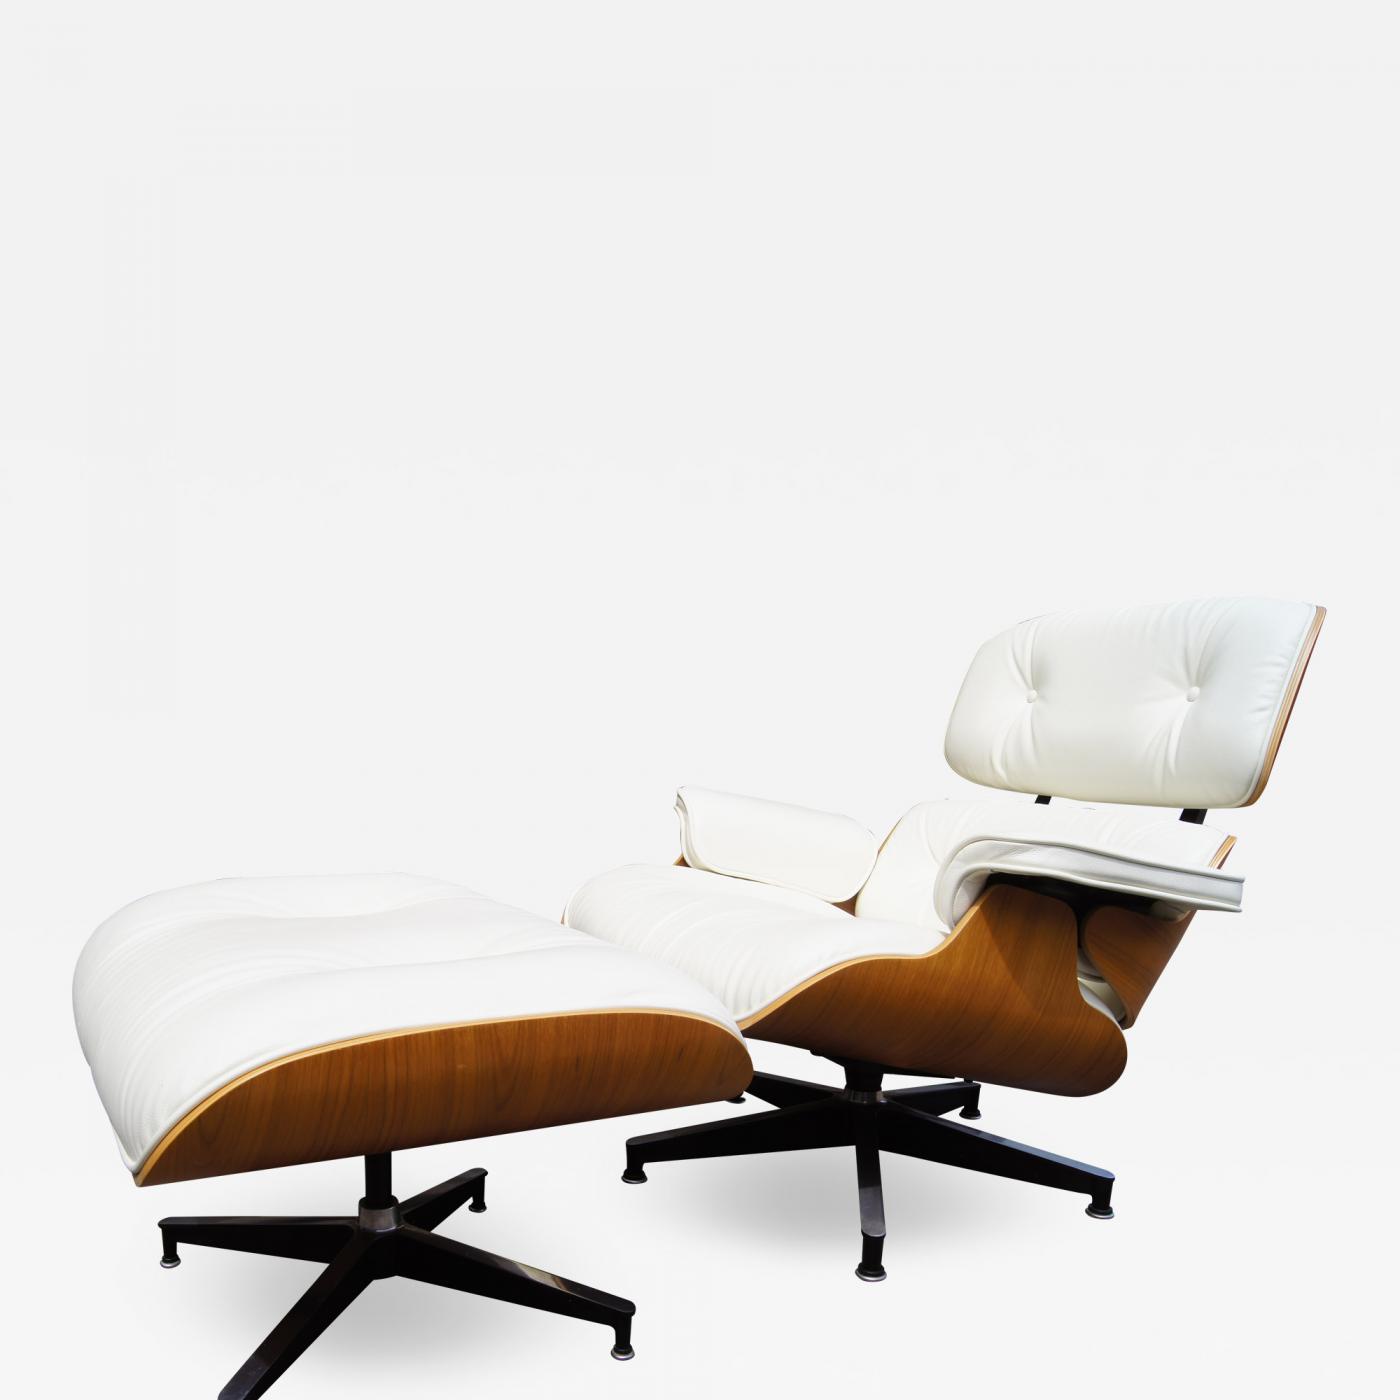 Charles & Ray Eames - White Leather Lounge Chair & Ottoman & Ray Eames for Herman Miller